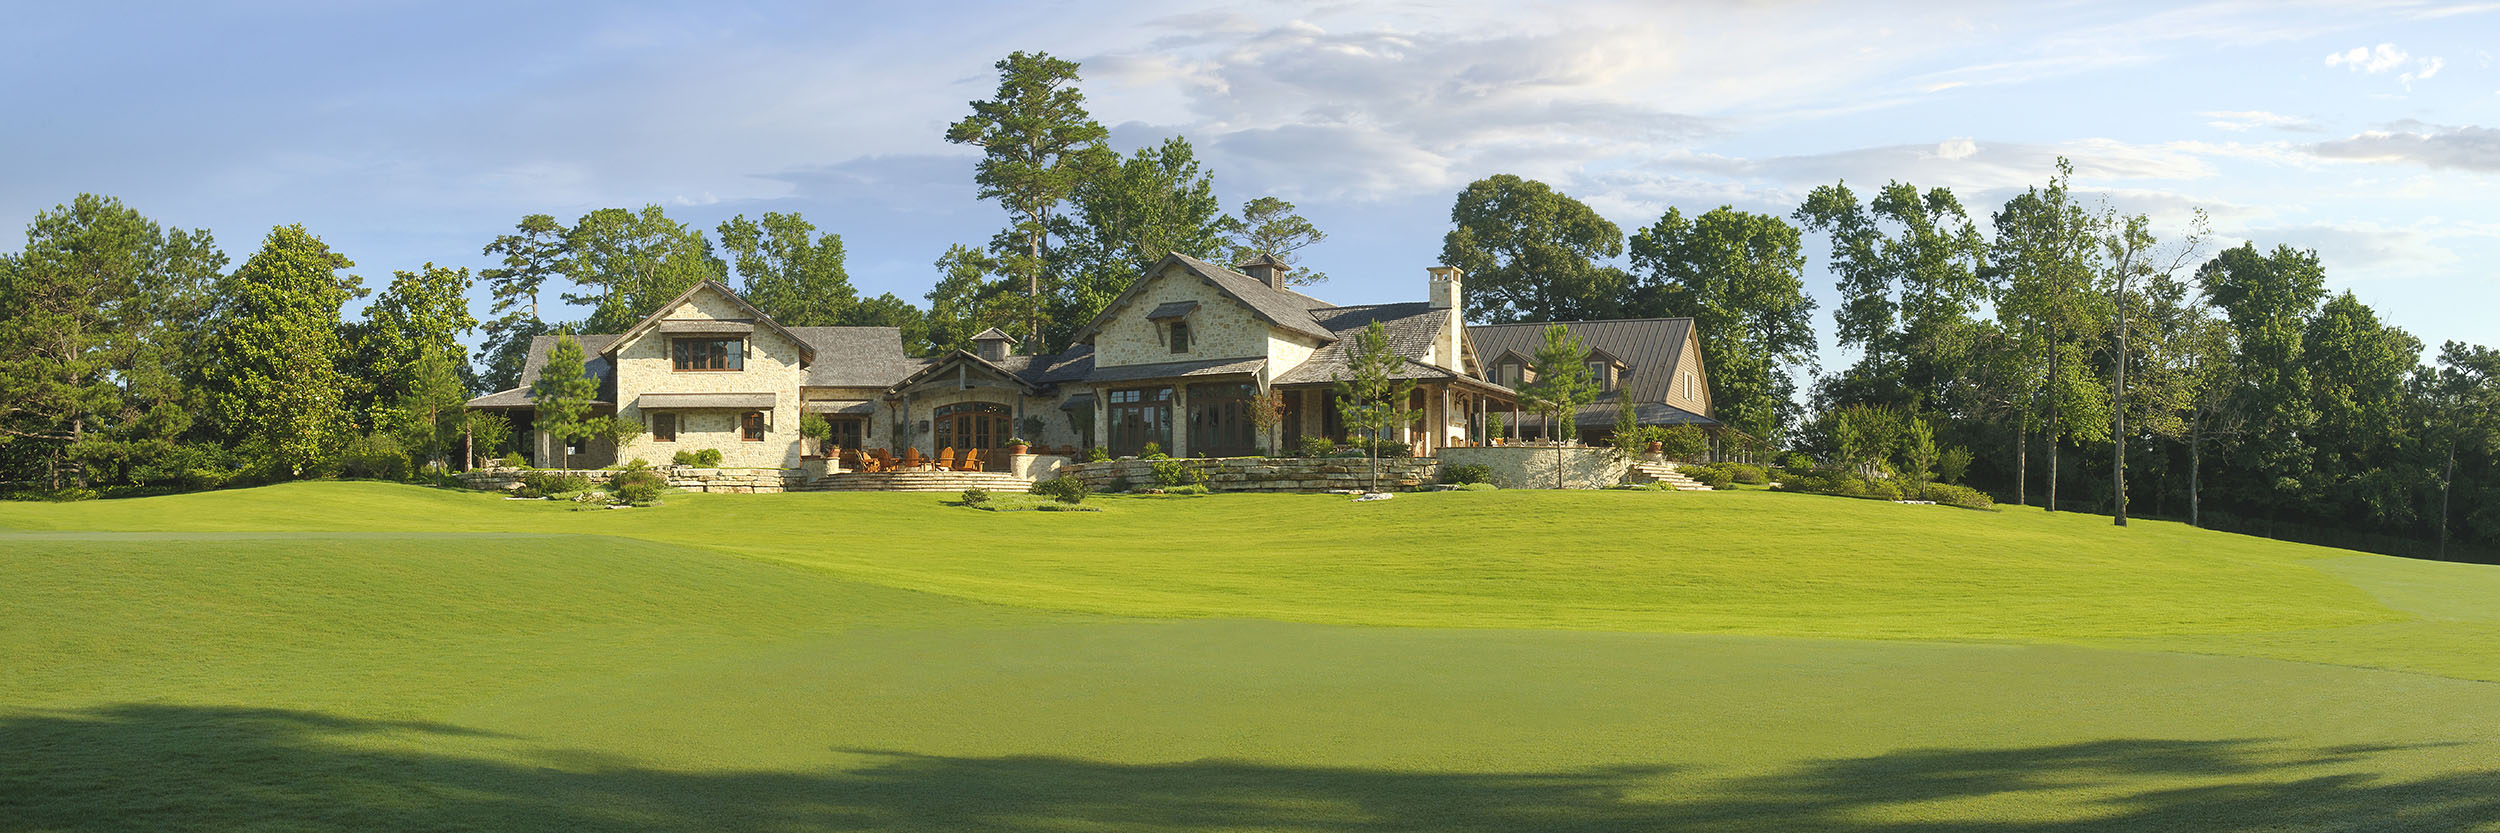 Whispering Pines Clubhouse